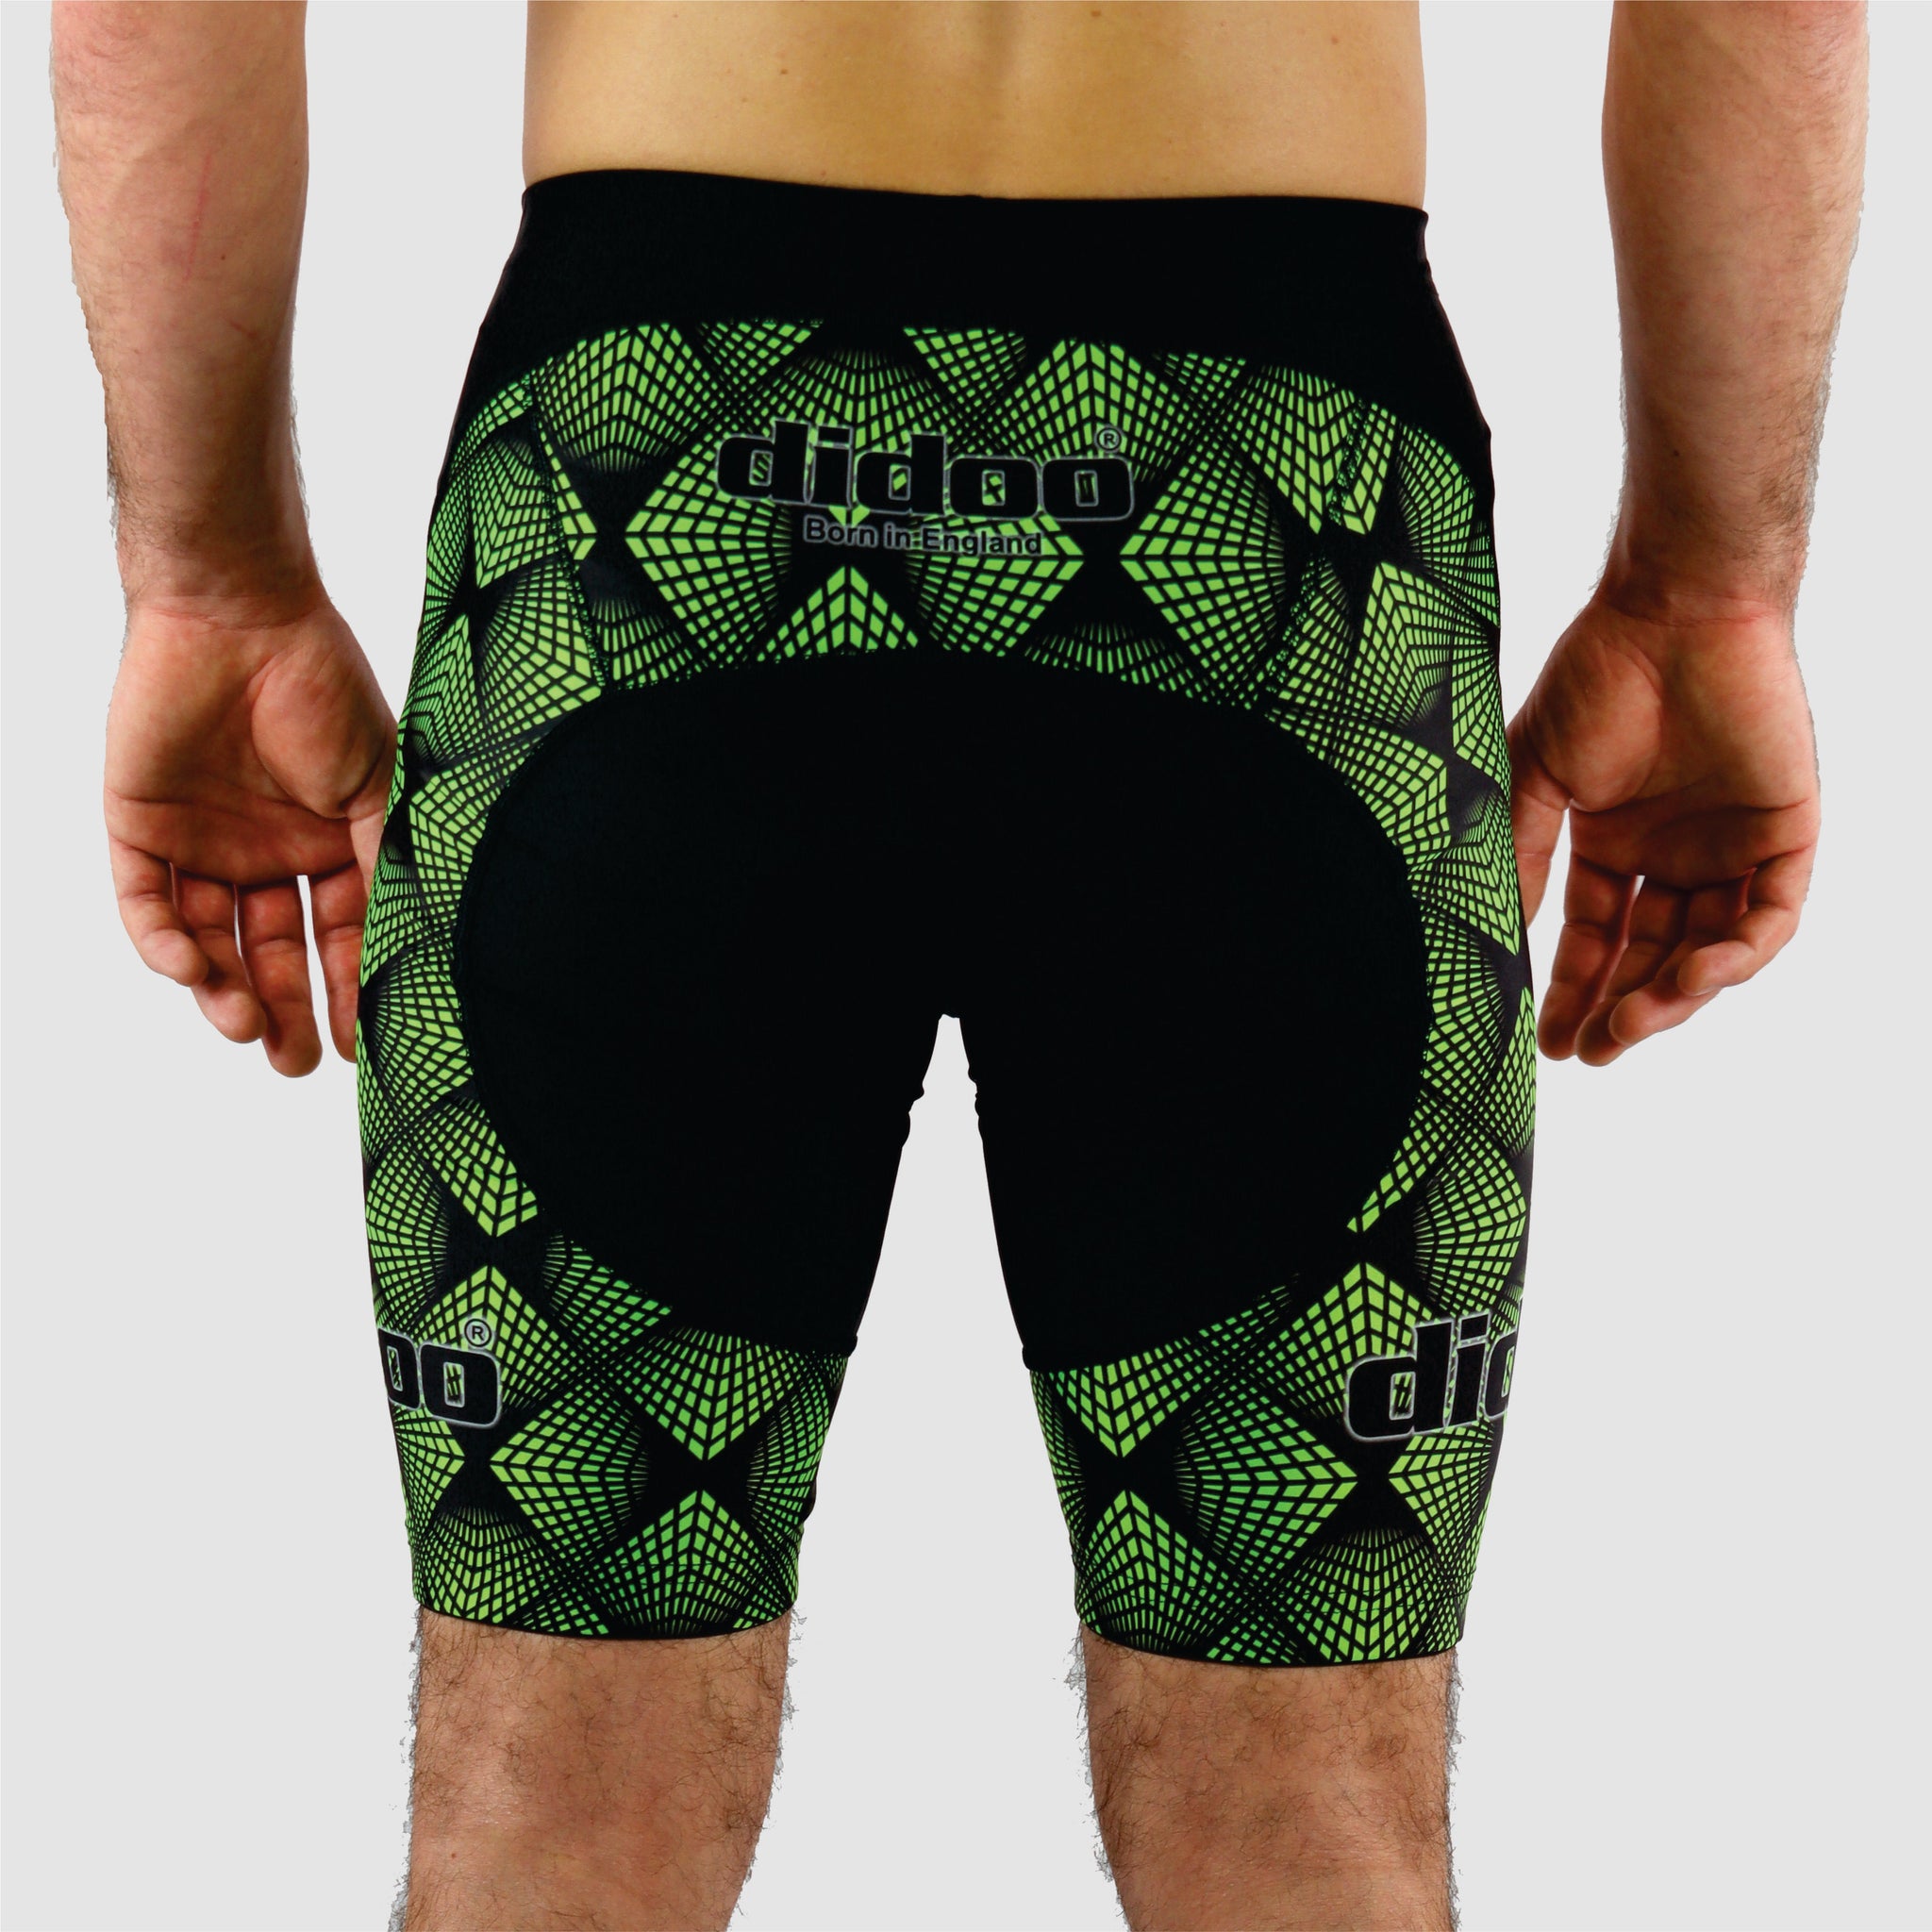 DiDOO Men's Classic Quick Dry Padded Cycling Shorts Black and Green